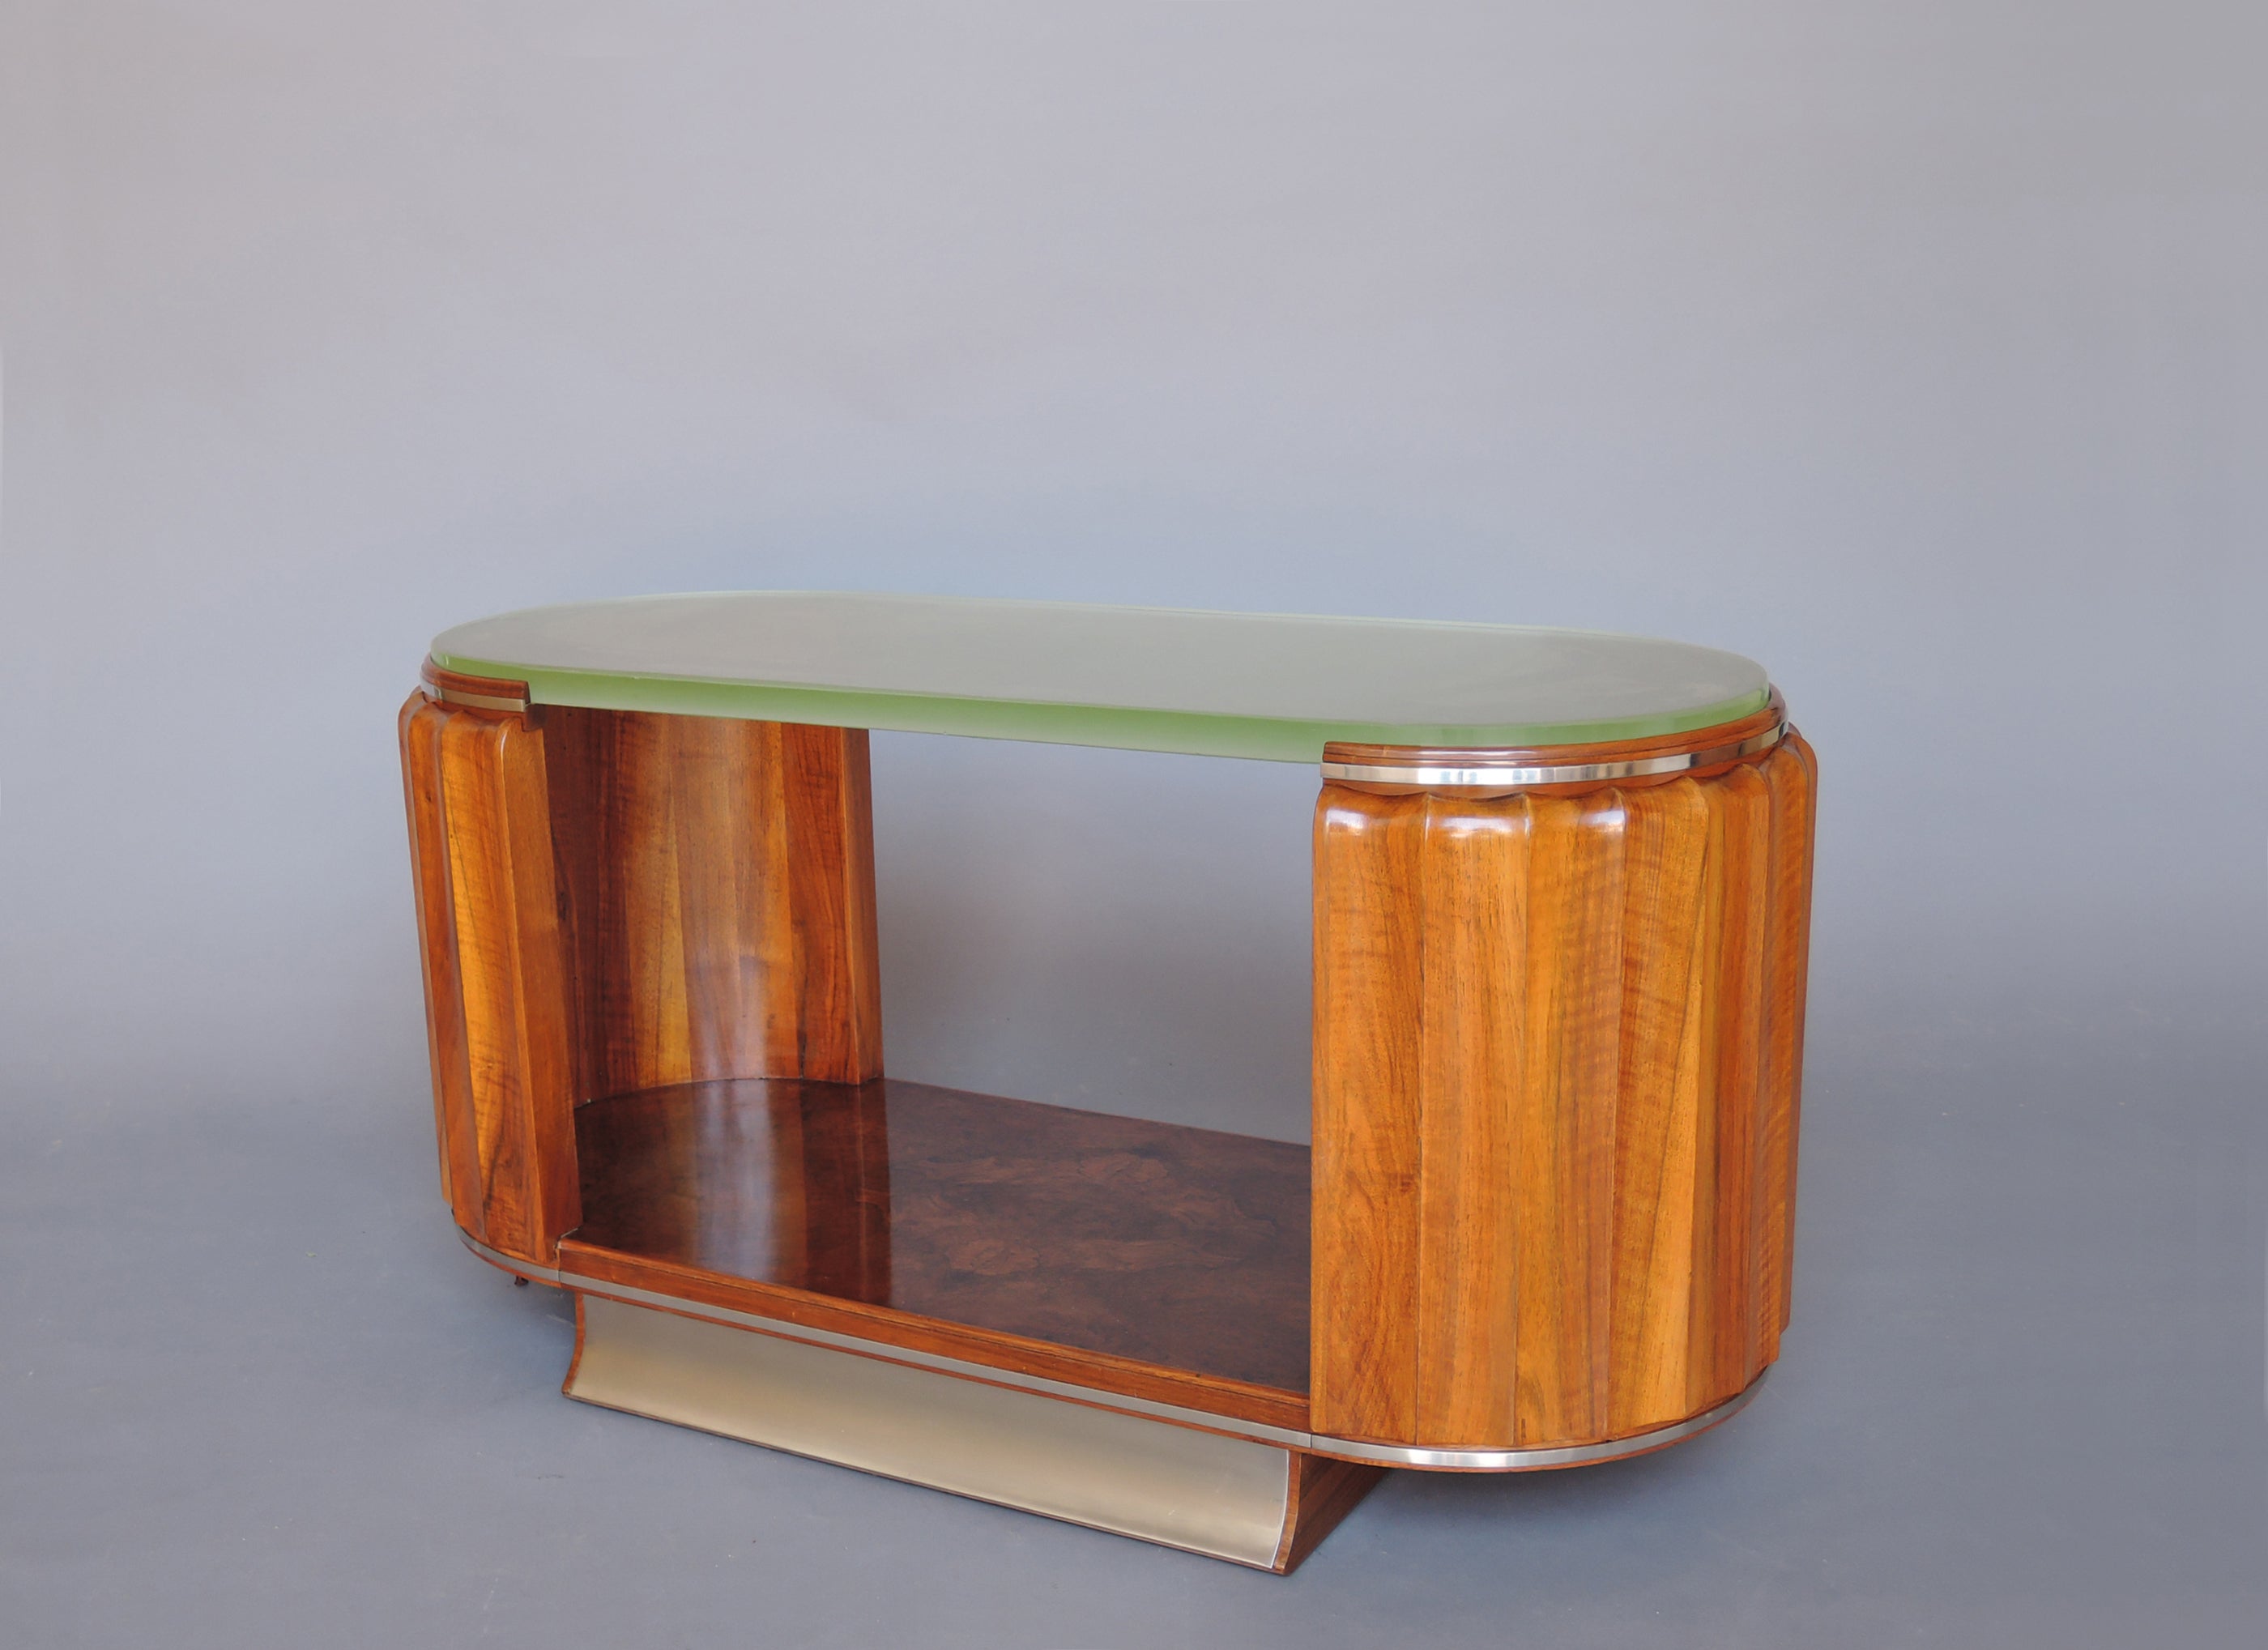 Fine French Art Deco Two-Tier Coffee Table by Haentges In Good Condition For Sale In Long Island City, NY